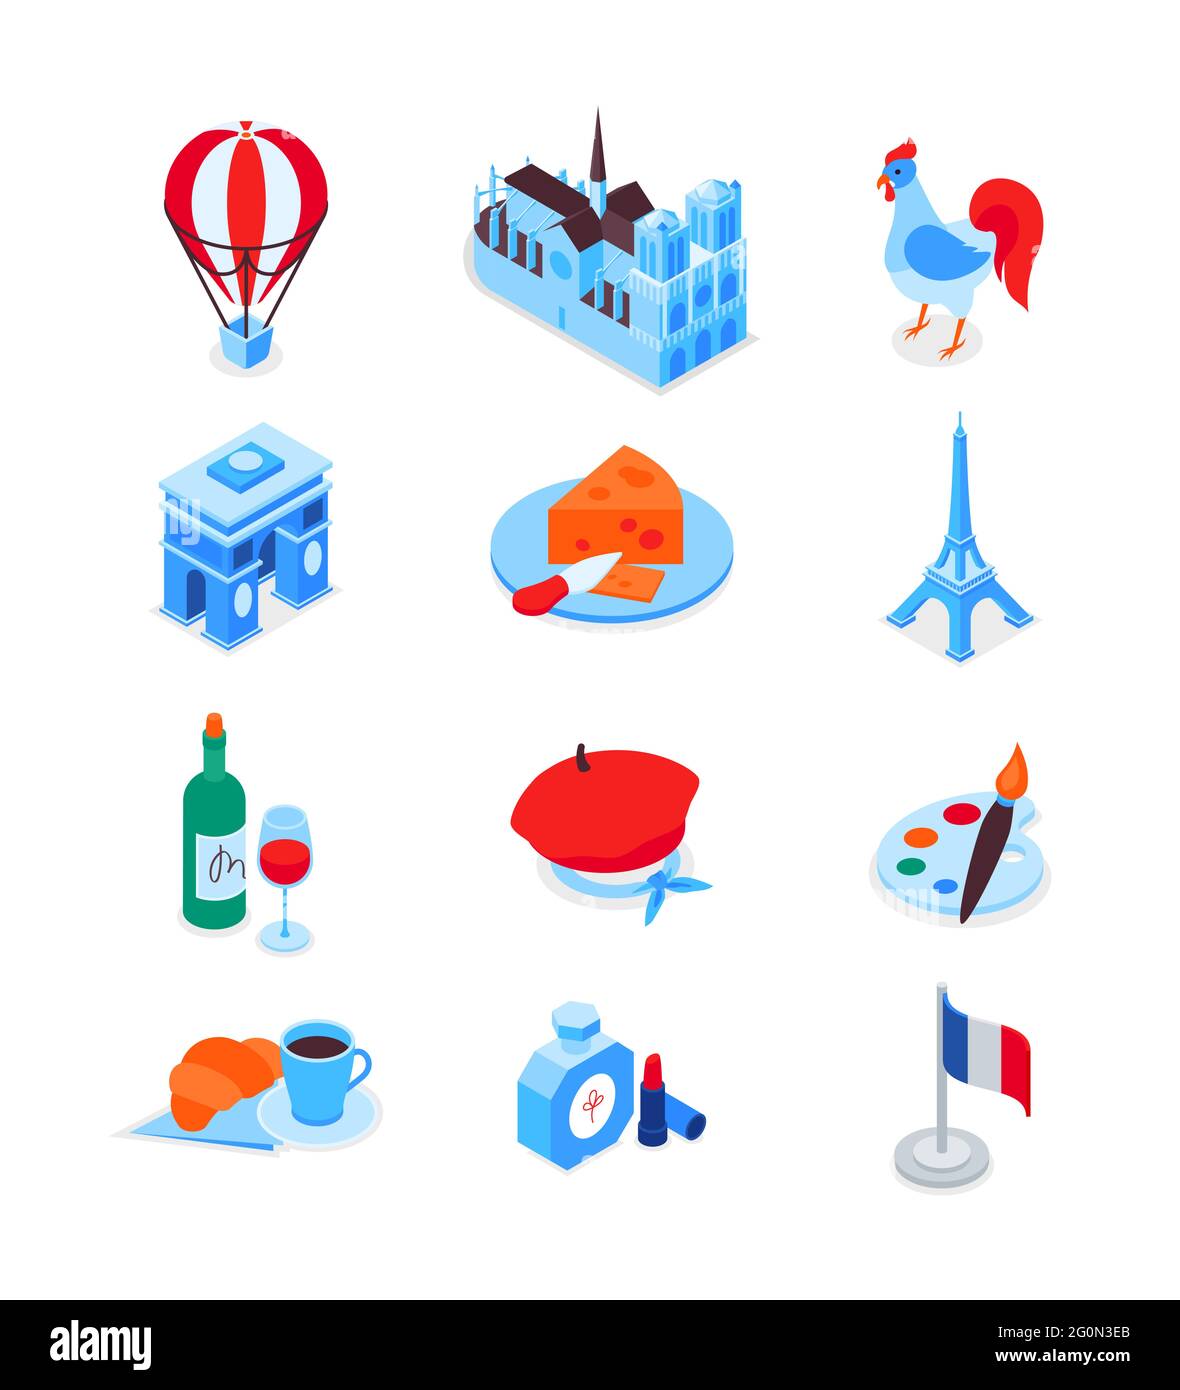 French symbols - modern colorful isometric icons set. Culture and traditions of France. Hot air balloon, wine, Triumphal arch, cheese, flag, Notre-dam Stock Vector